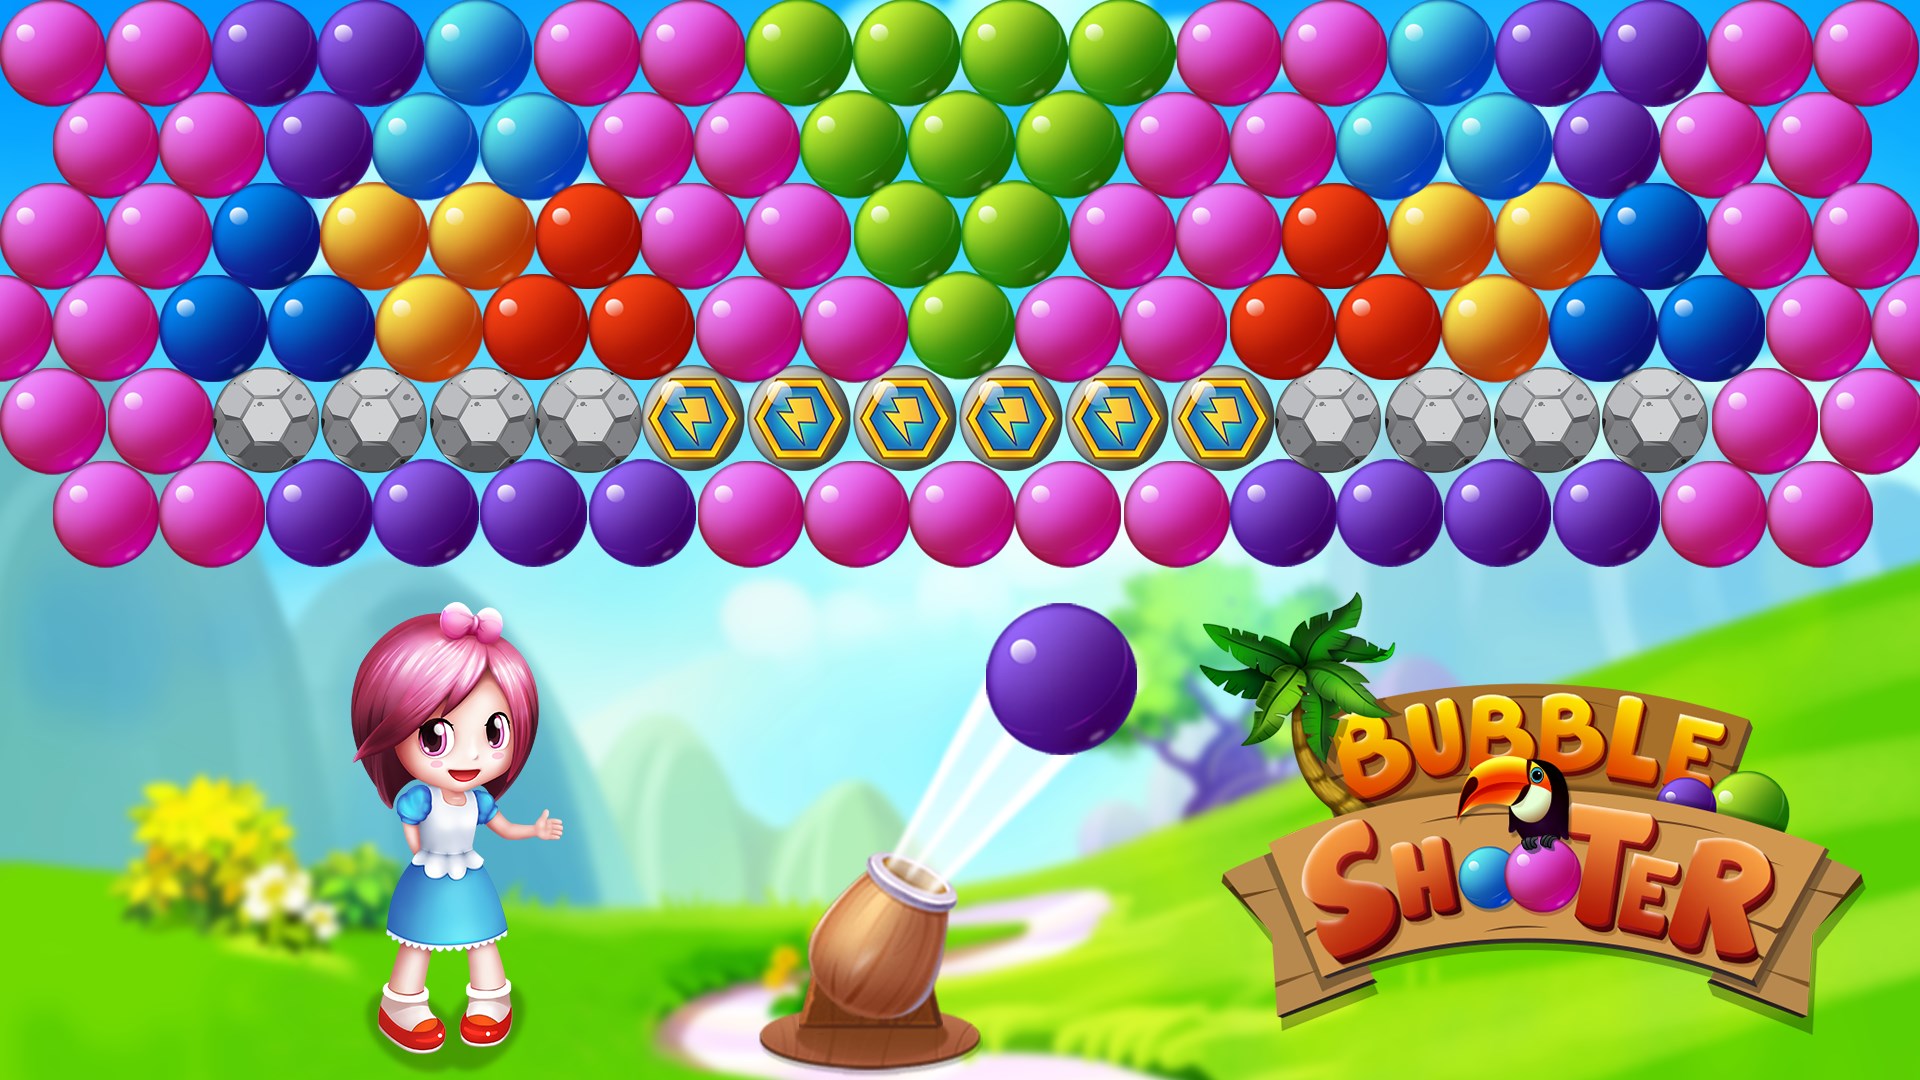 Get Bubble Shooter Pop Party - Microsoft Store